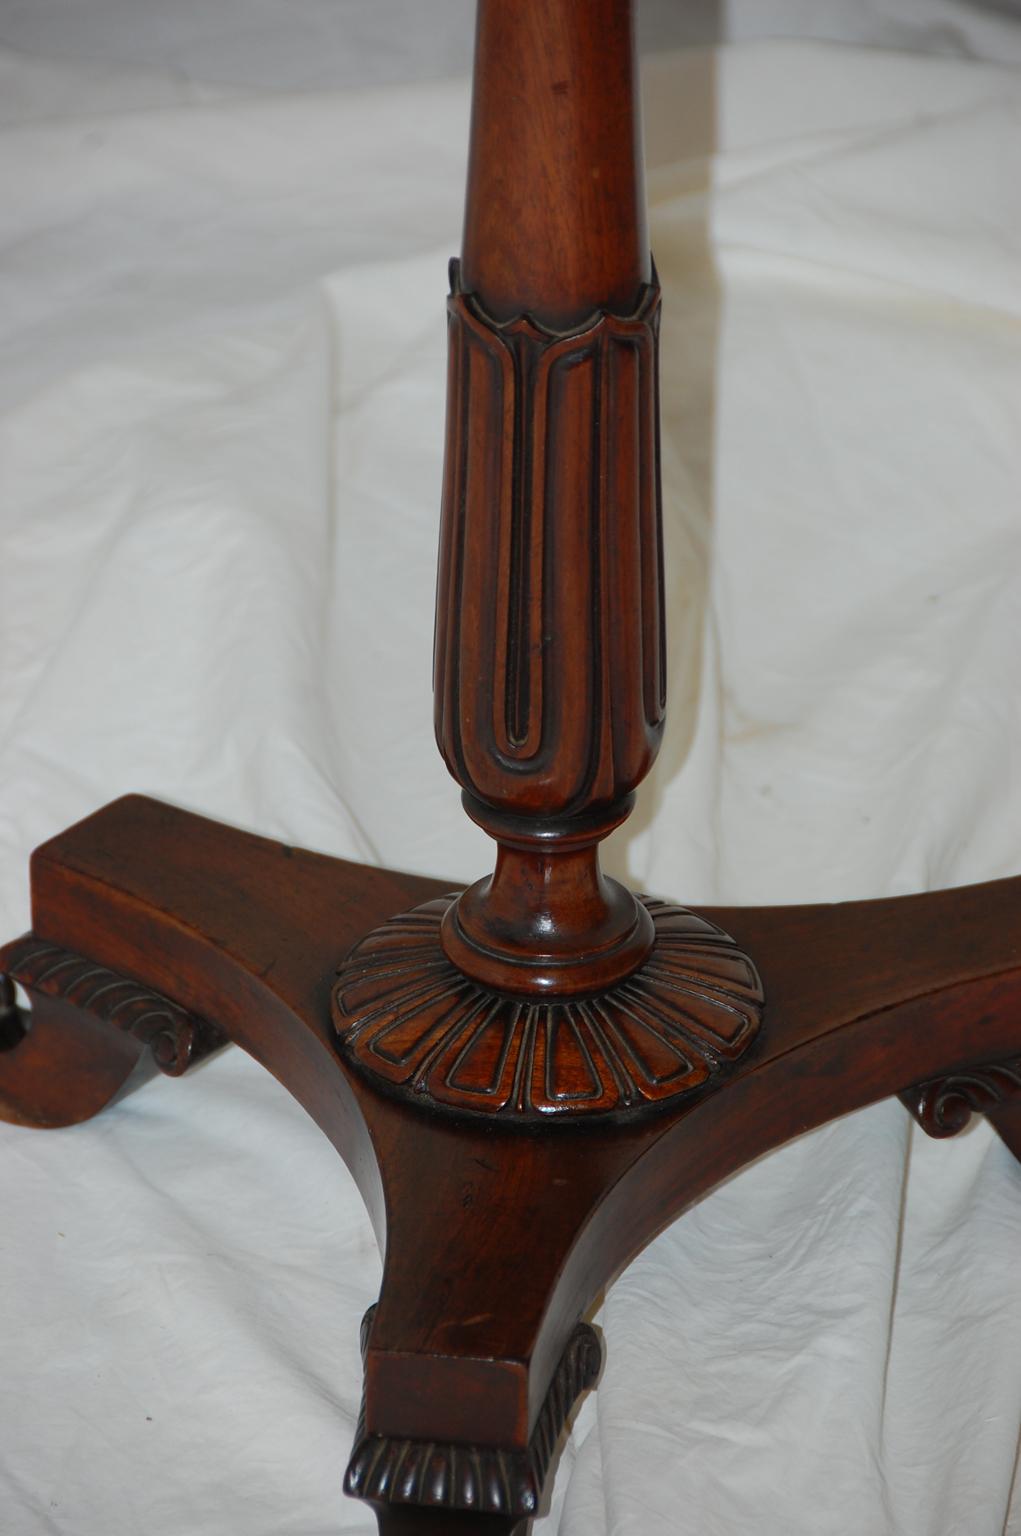 English Regency period pedestal side table in mahogany with delicate carved stem, inset white marble top with broad mahogany banding. The acanthus leaf carving to the stem and the carved upswept feet set this table apart from the normal. It can be